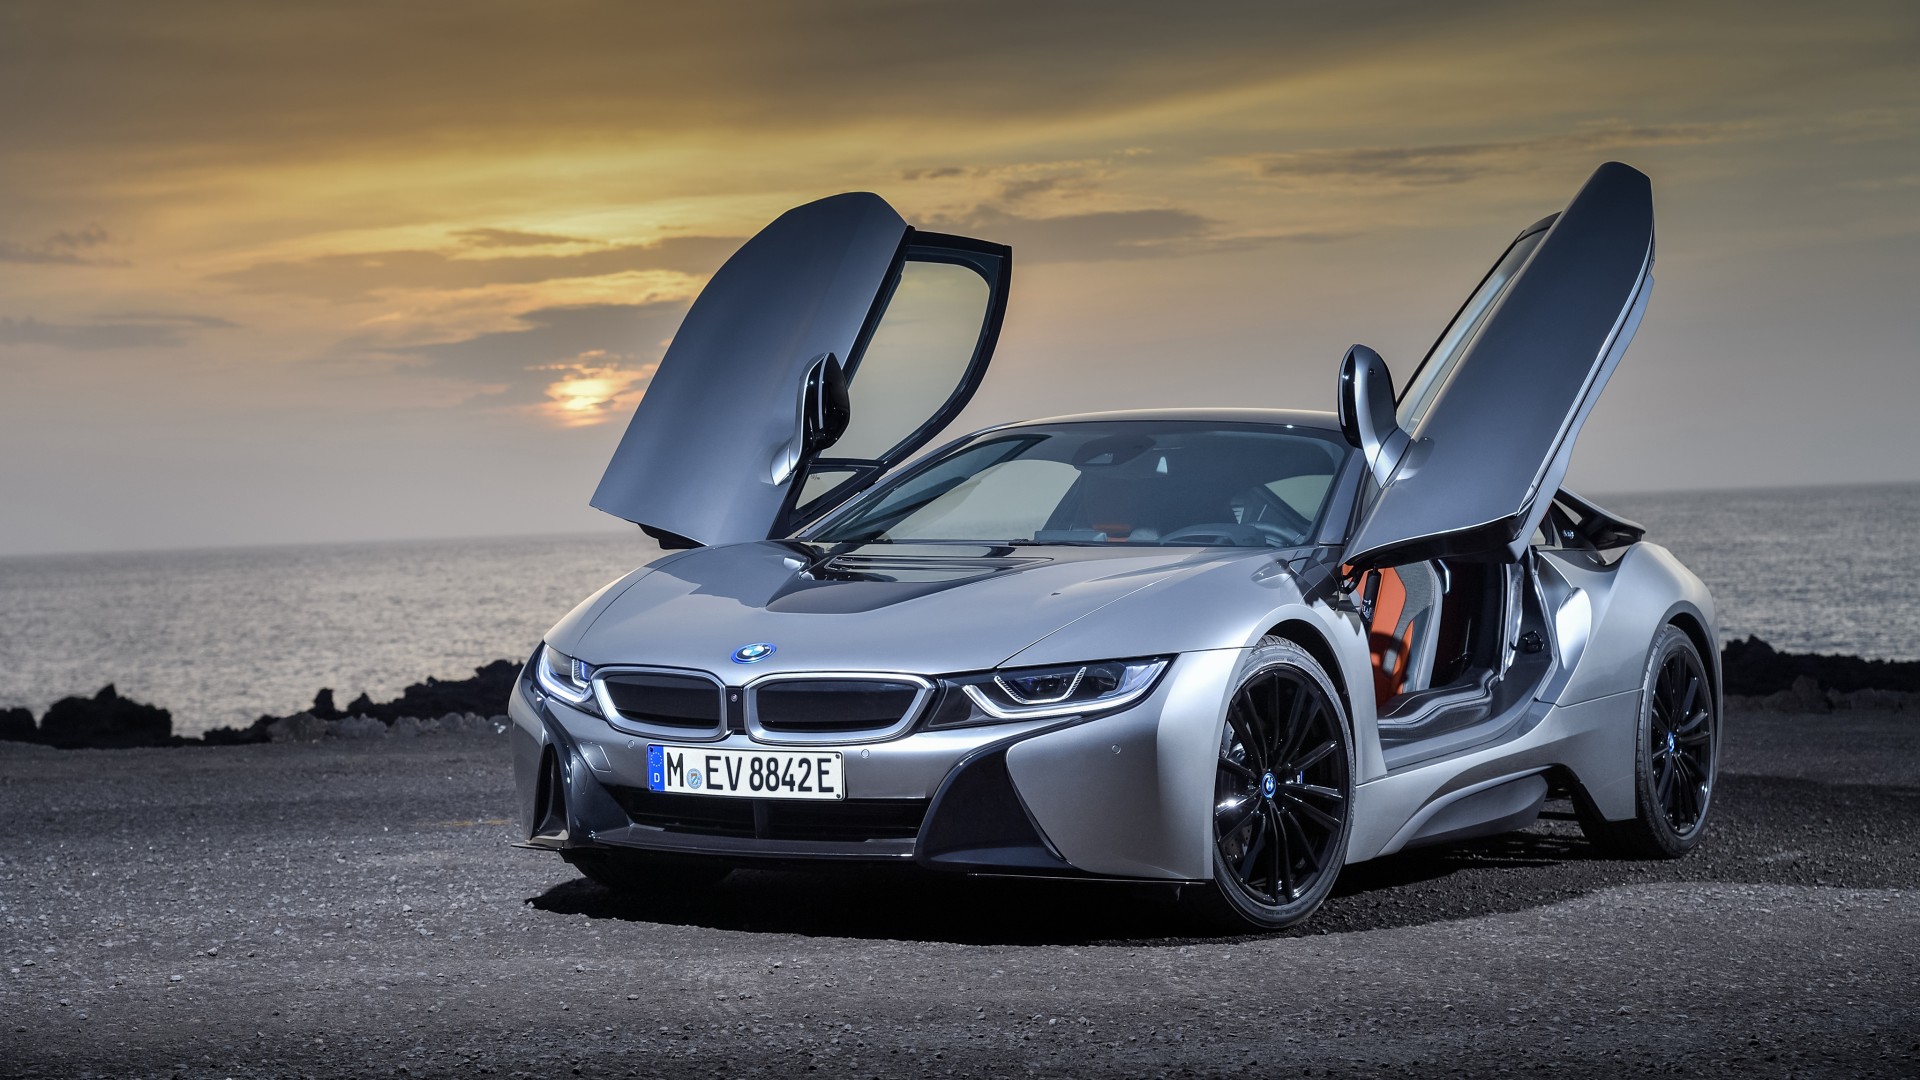 2018 BMW i8 Coupe 4K Wallpaper HD Car Wallpapers ID 9191